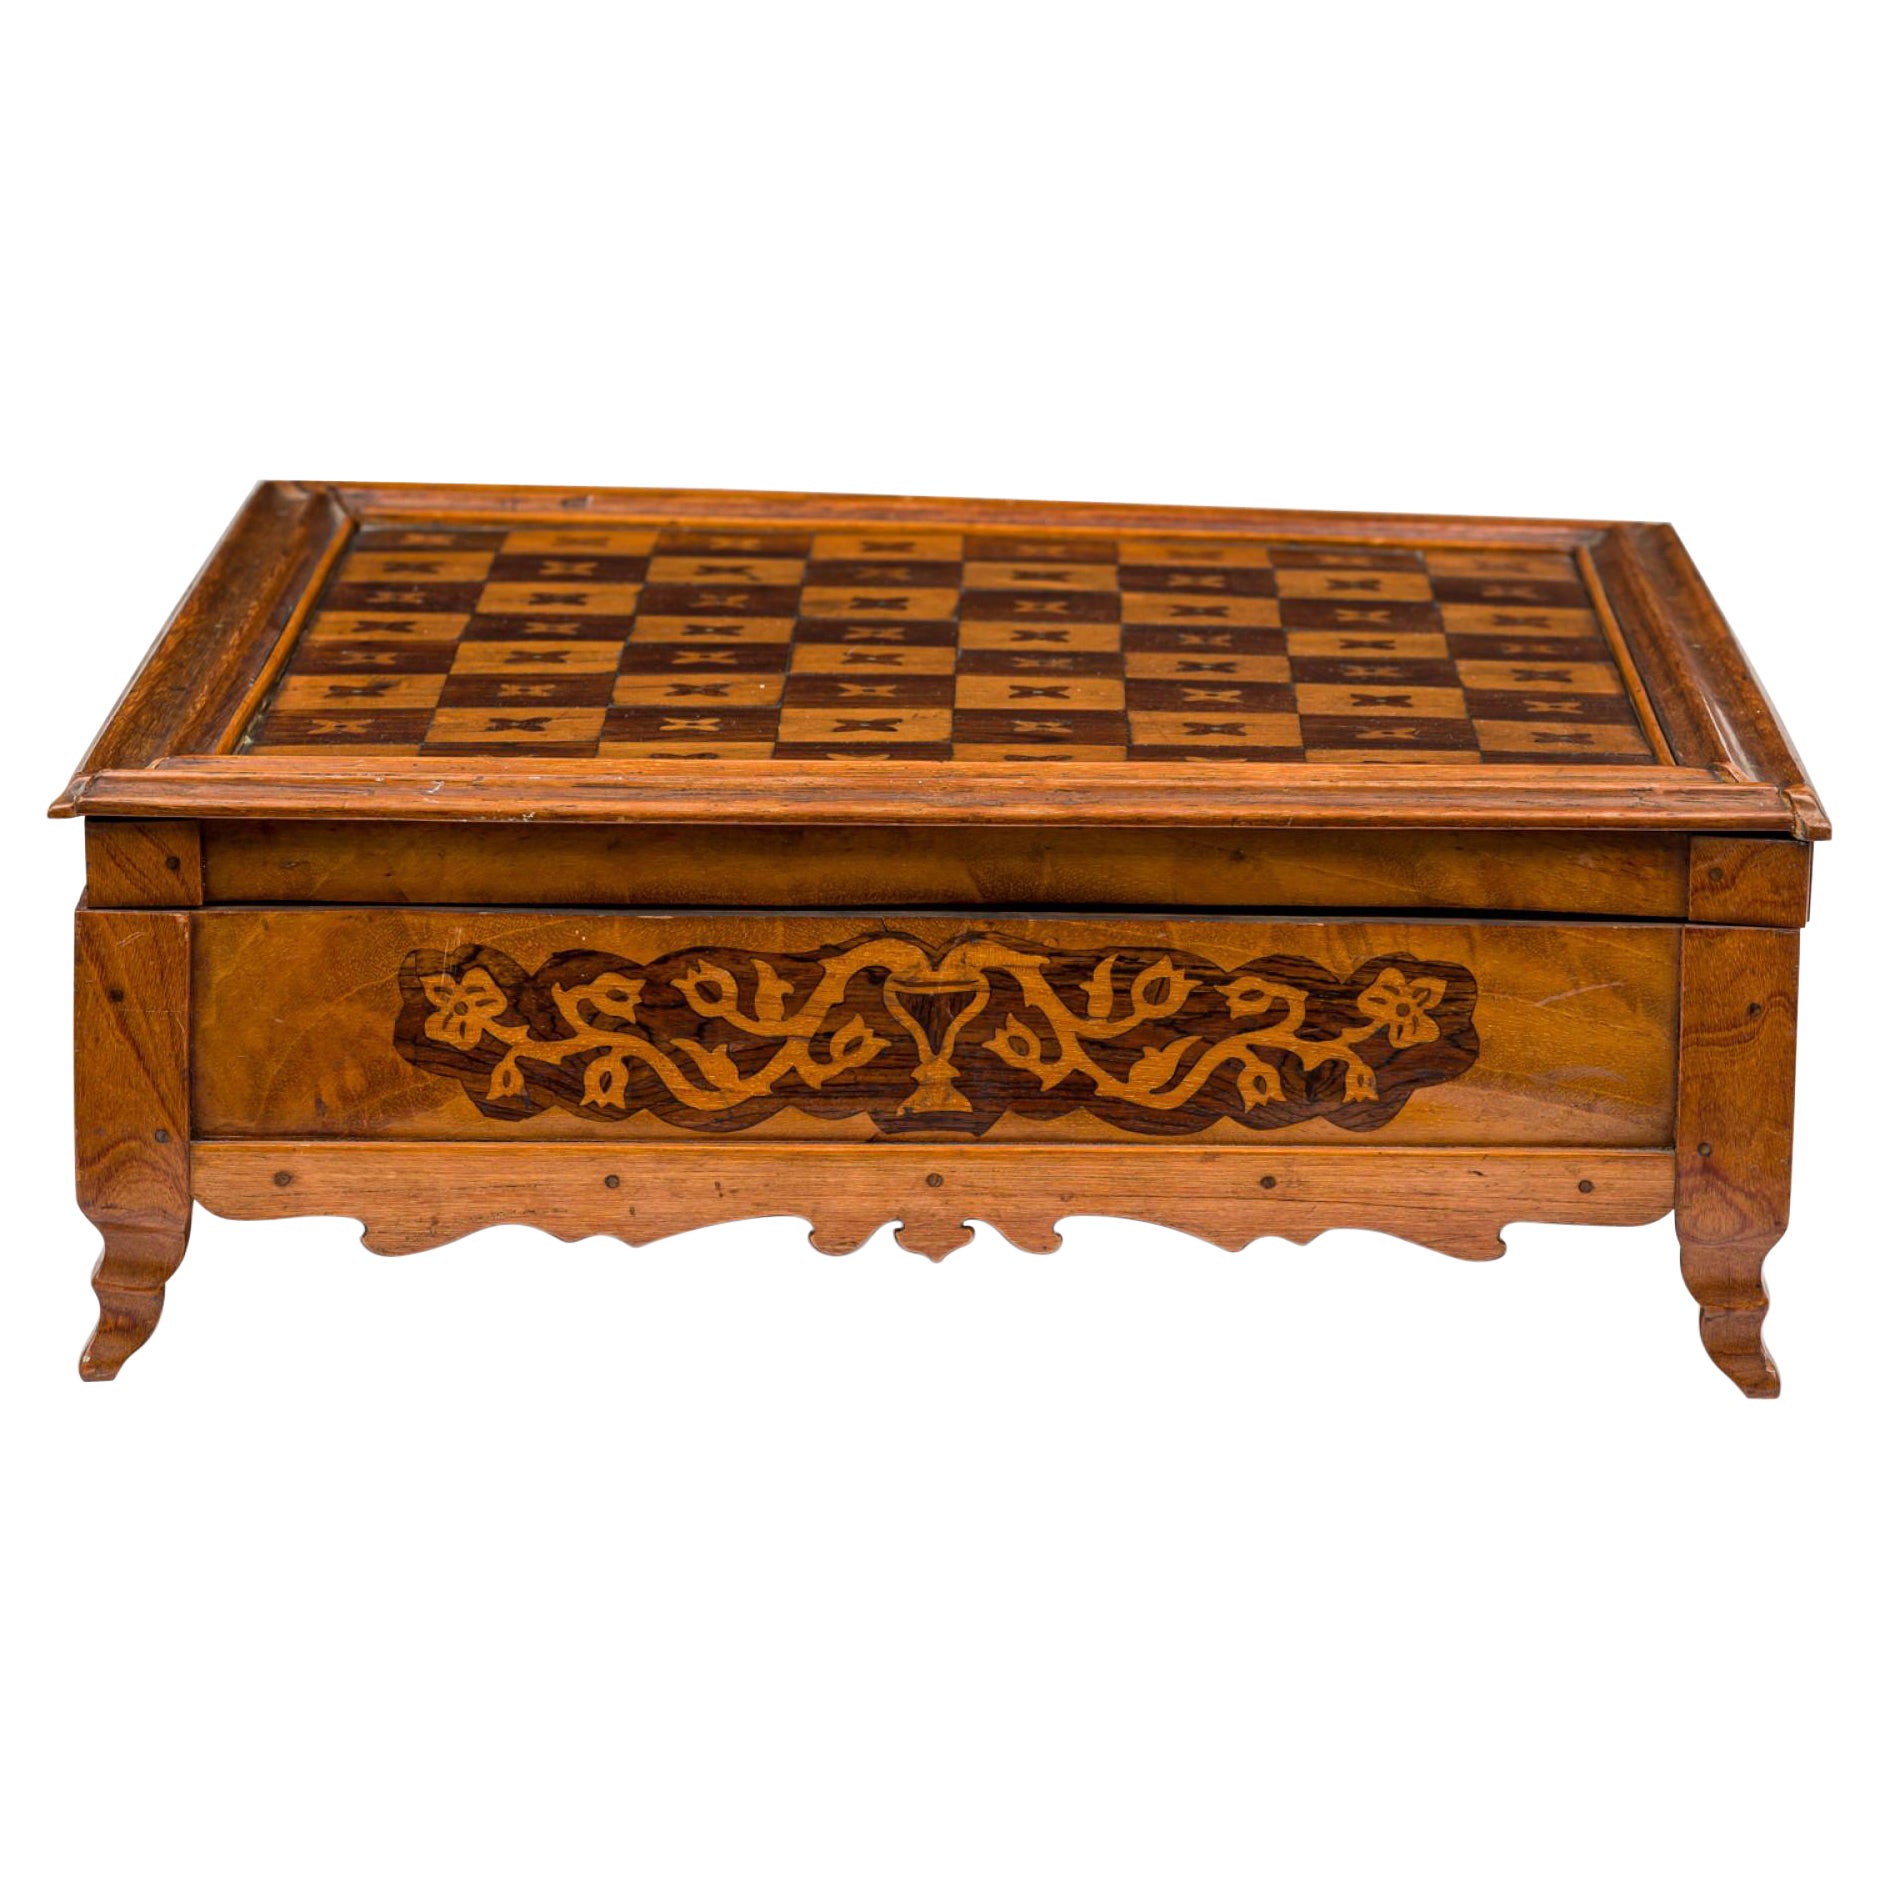 Early 20th Century Carved Mahogany, Cocobolo & Mother-of-Pearl Game Box For Sale